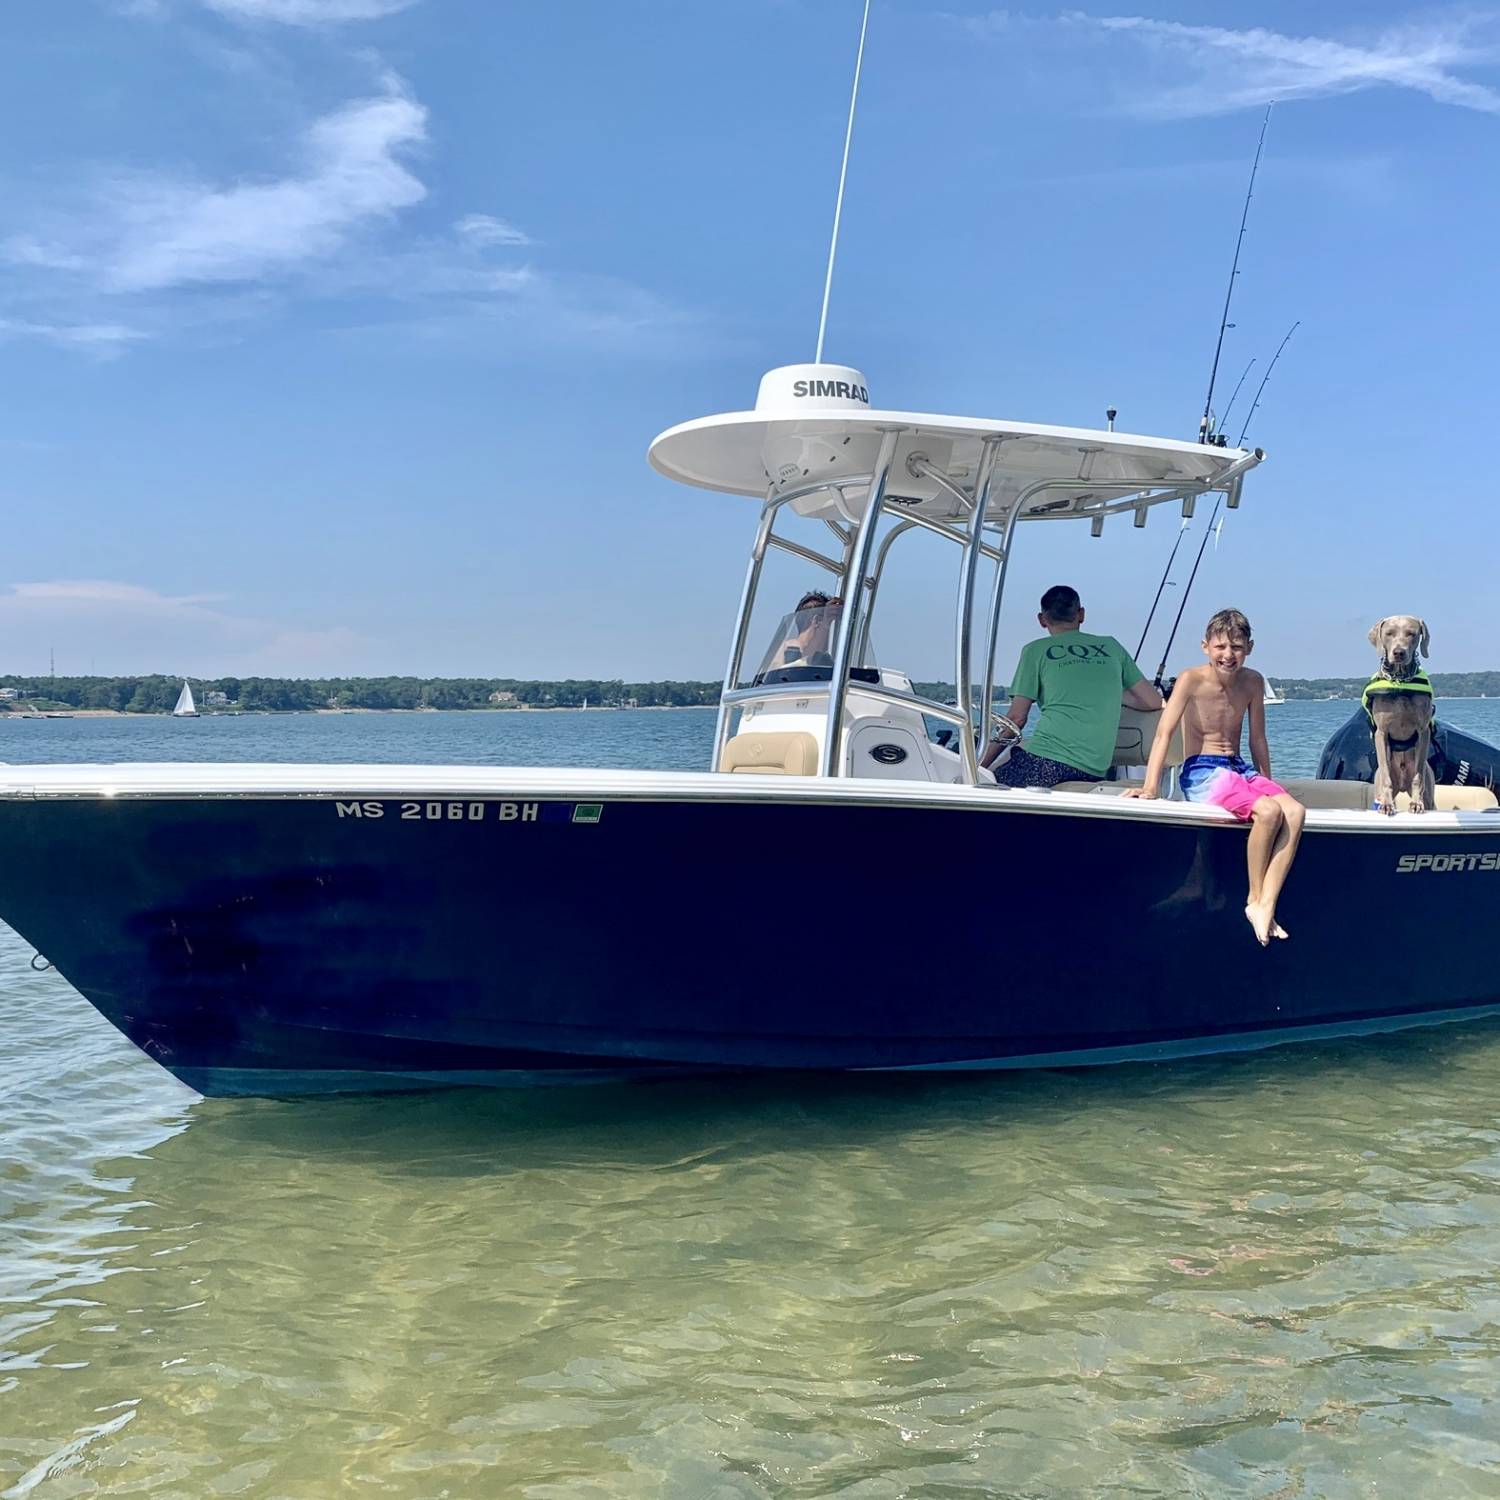 Title: Boats best friend - On board their Sportsman Heritage 231 Center Console - Location: Pleasant Bay, Chatham, Massachusetts. Participating in the Photo Contest #SportsmanSeptember